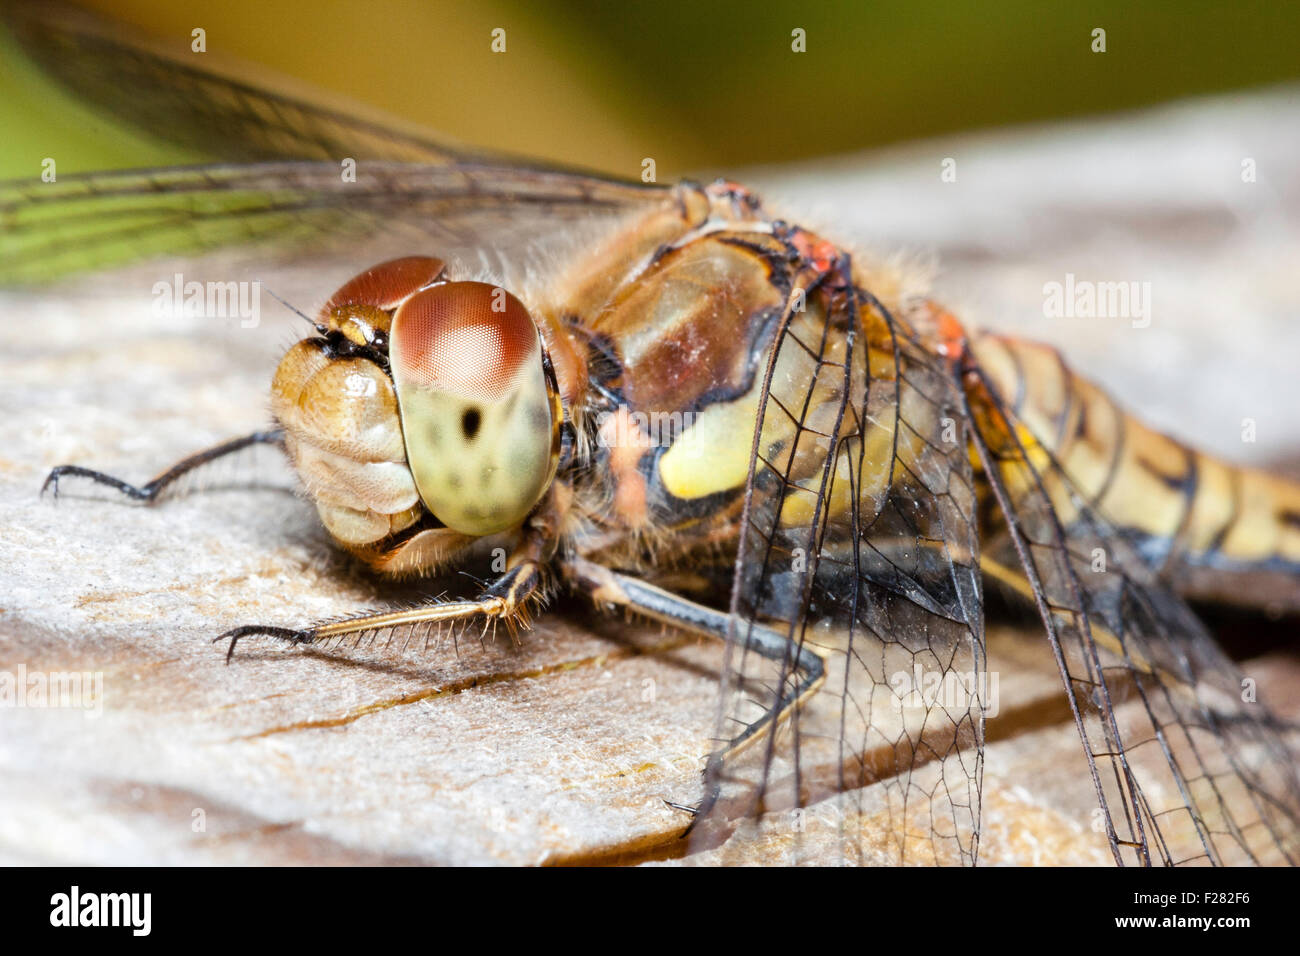 Insect, Close up of Dragonfly, Common Darter 'sympetrum striolatum', perched on wooden fence slat. Detail of compound eye, legs, and thorax. Stock Photo